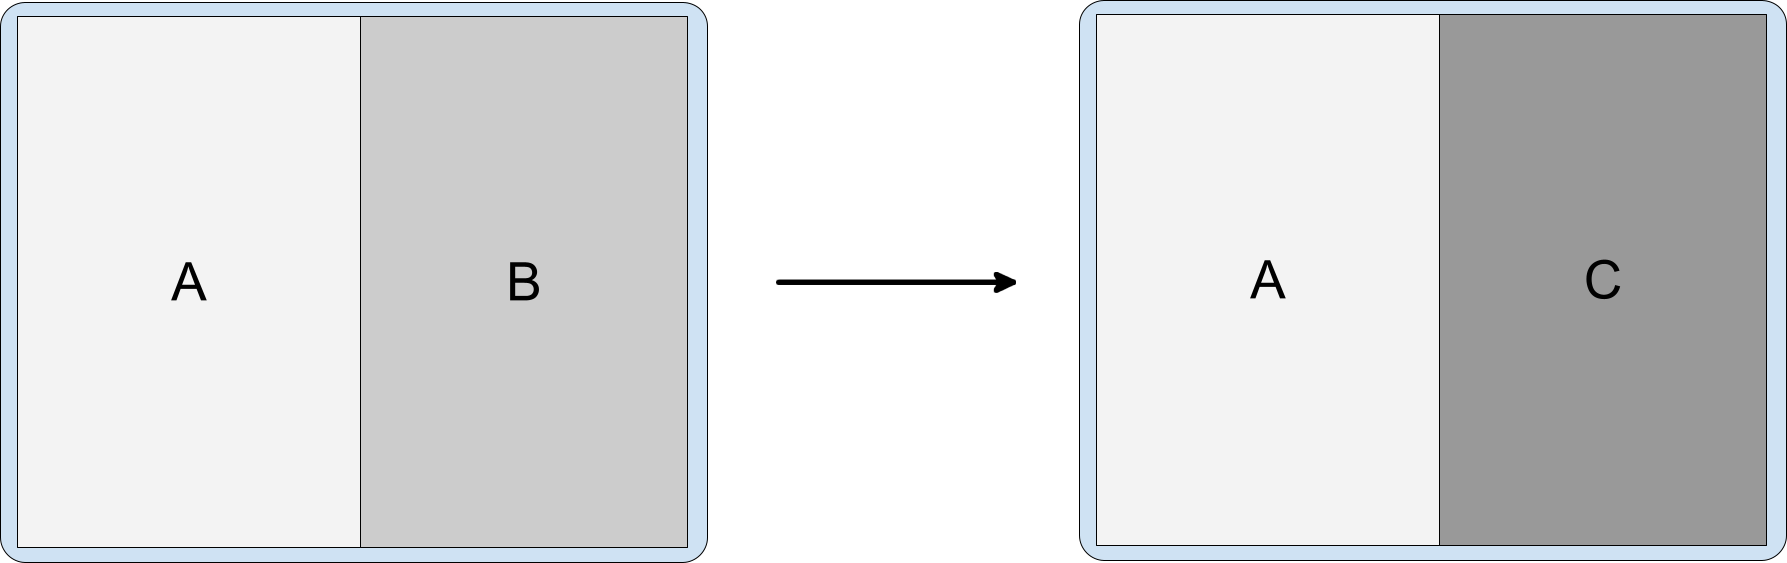 Activity split containing activities A, B, and C with C stacked on
          top of B.